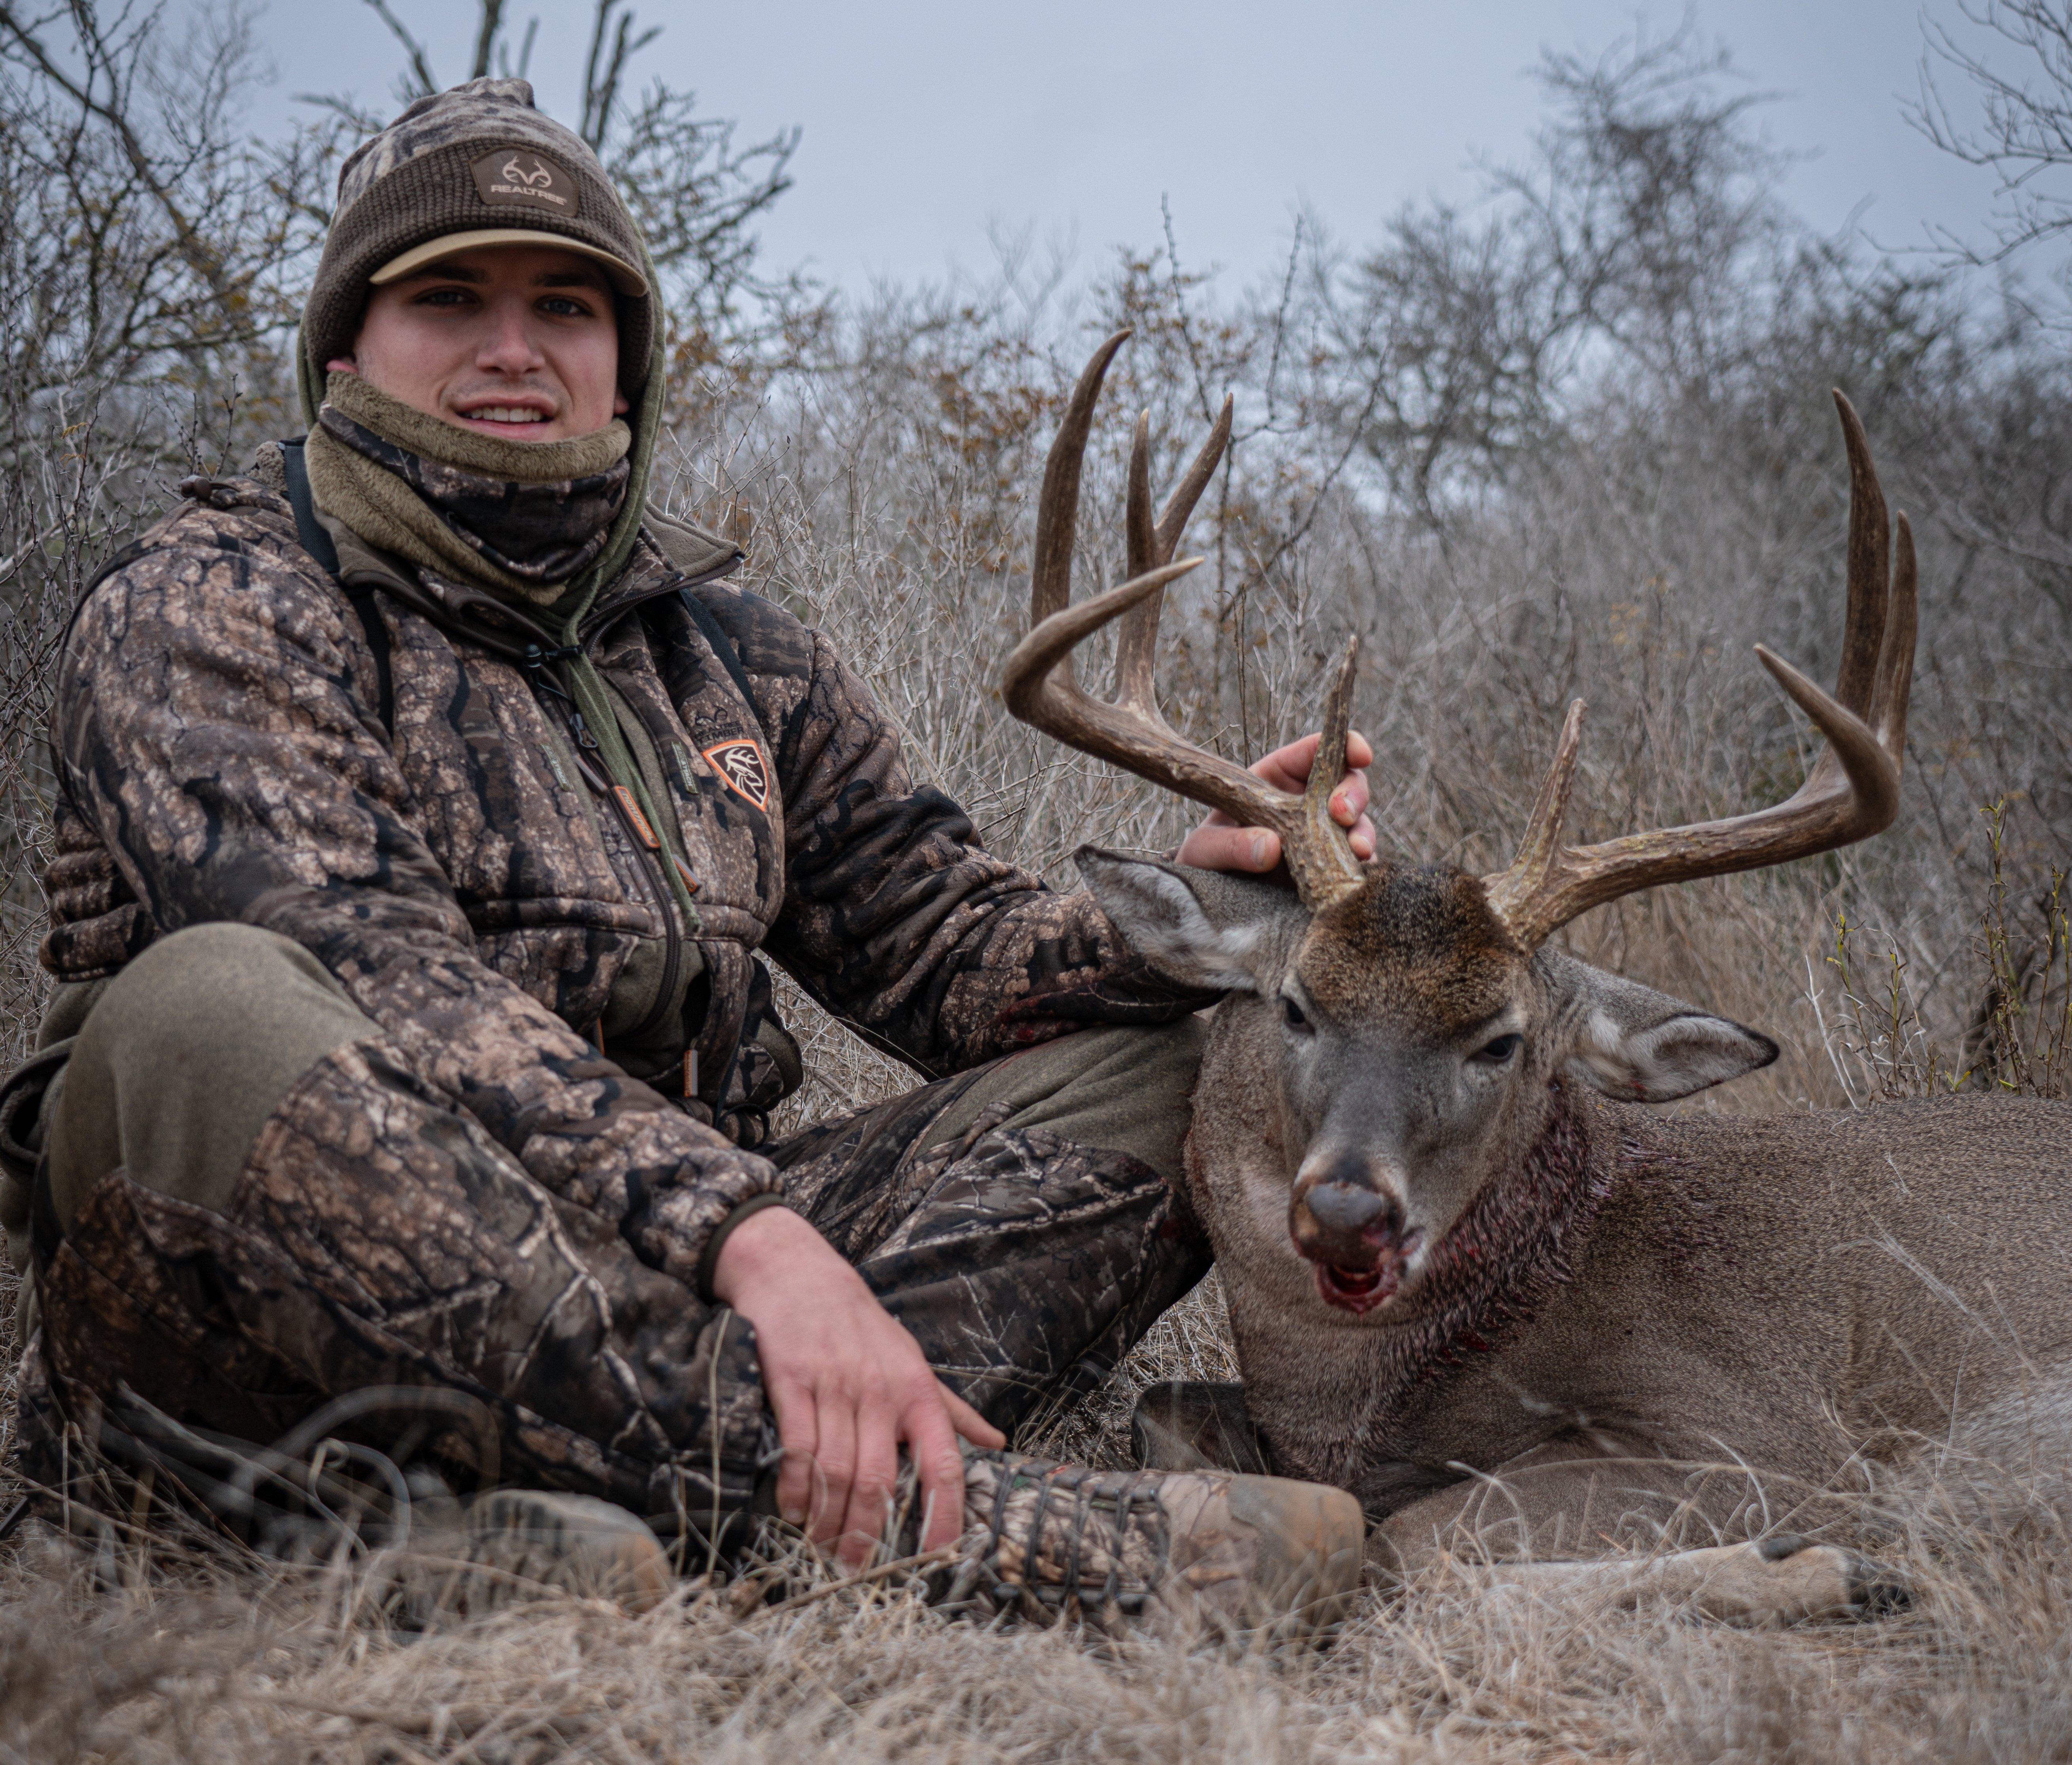 Austin Riley became buddies with Tyler Jordan, and now co-hosts Road Trips on Realtree 365. Here he is with a fine Texas buck.